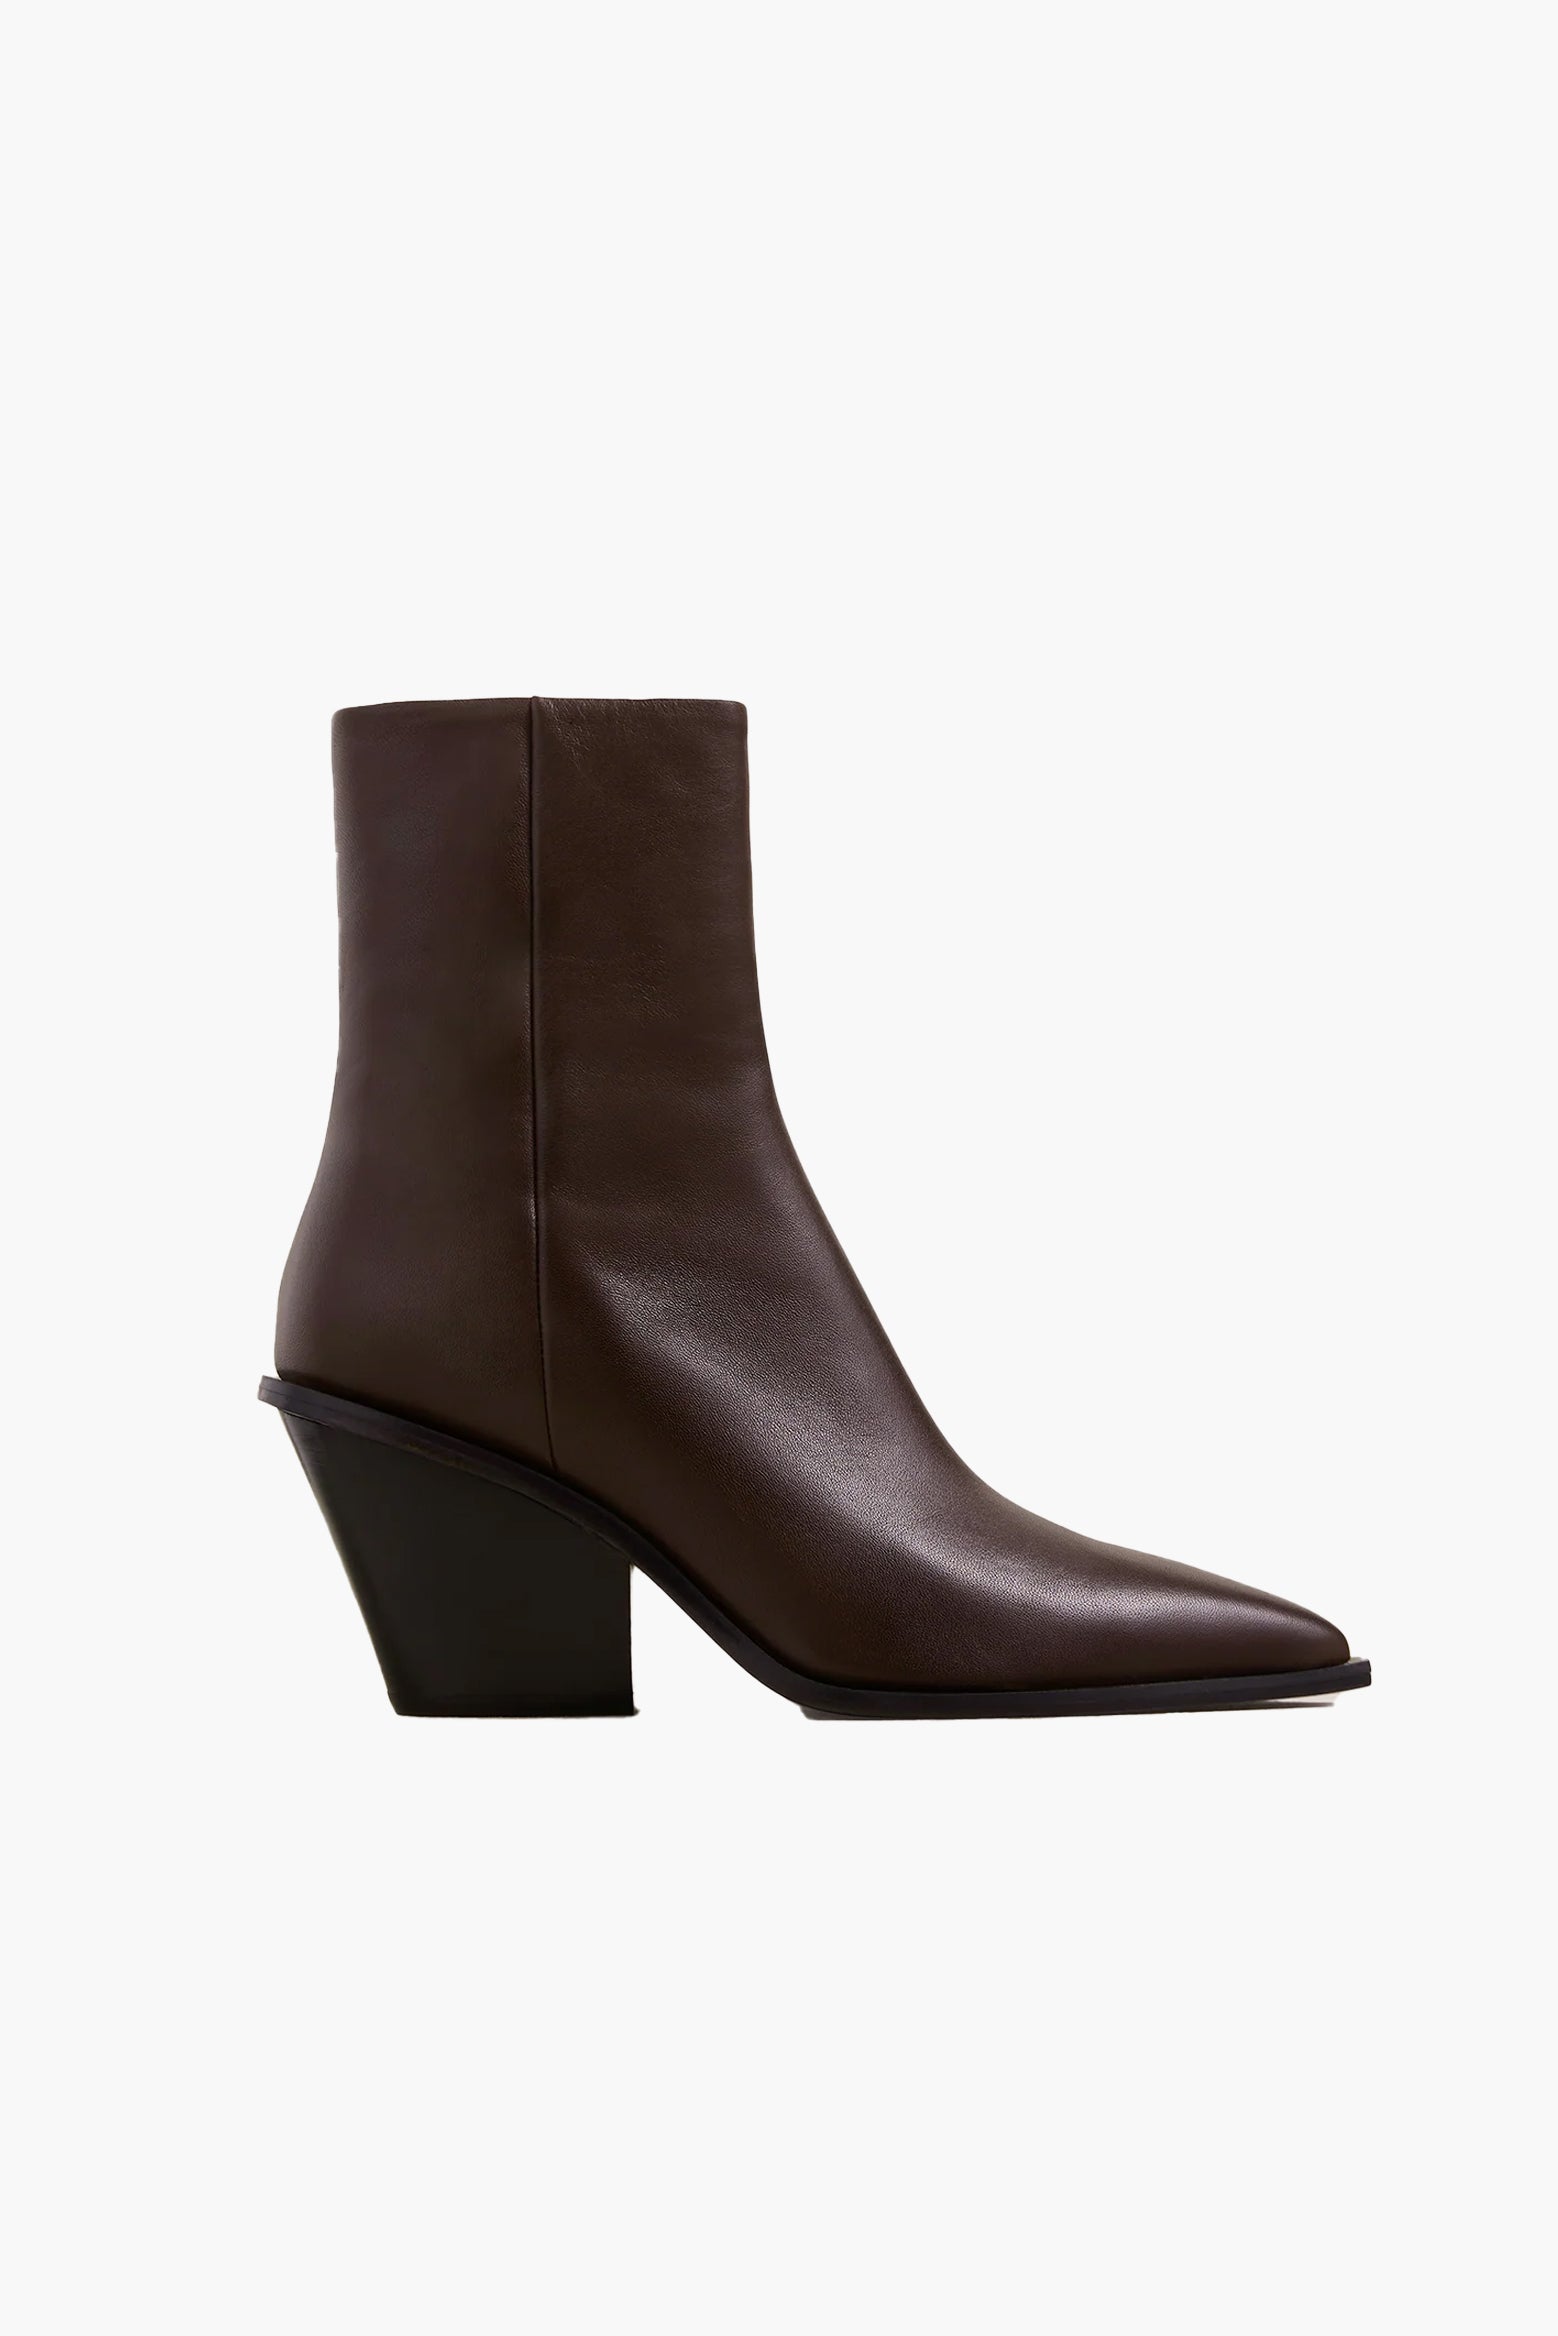 A.Emery Odin Boot in Walnut available at The New Trend Australia. 